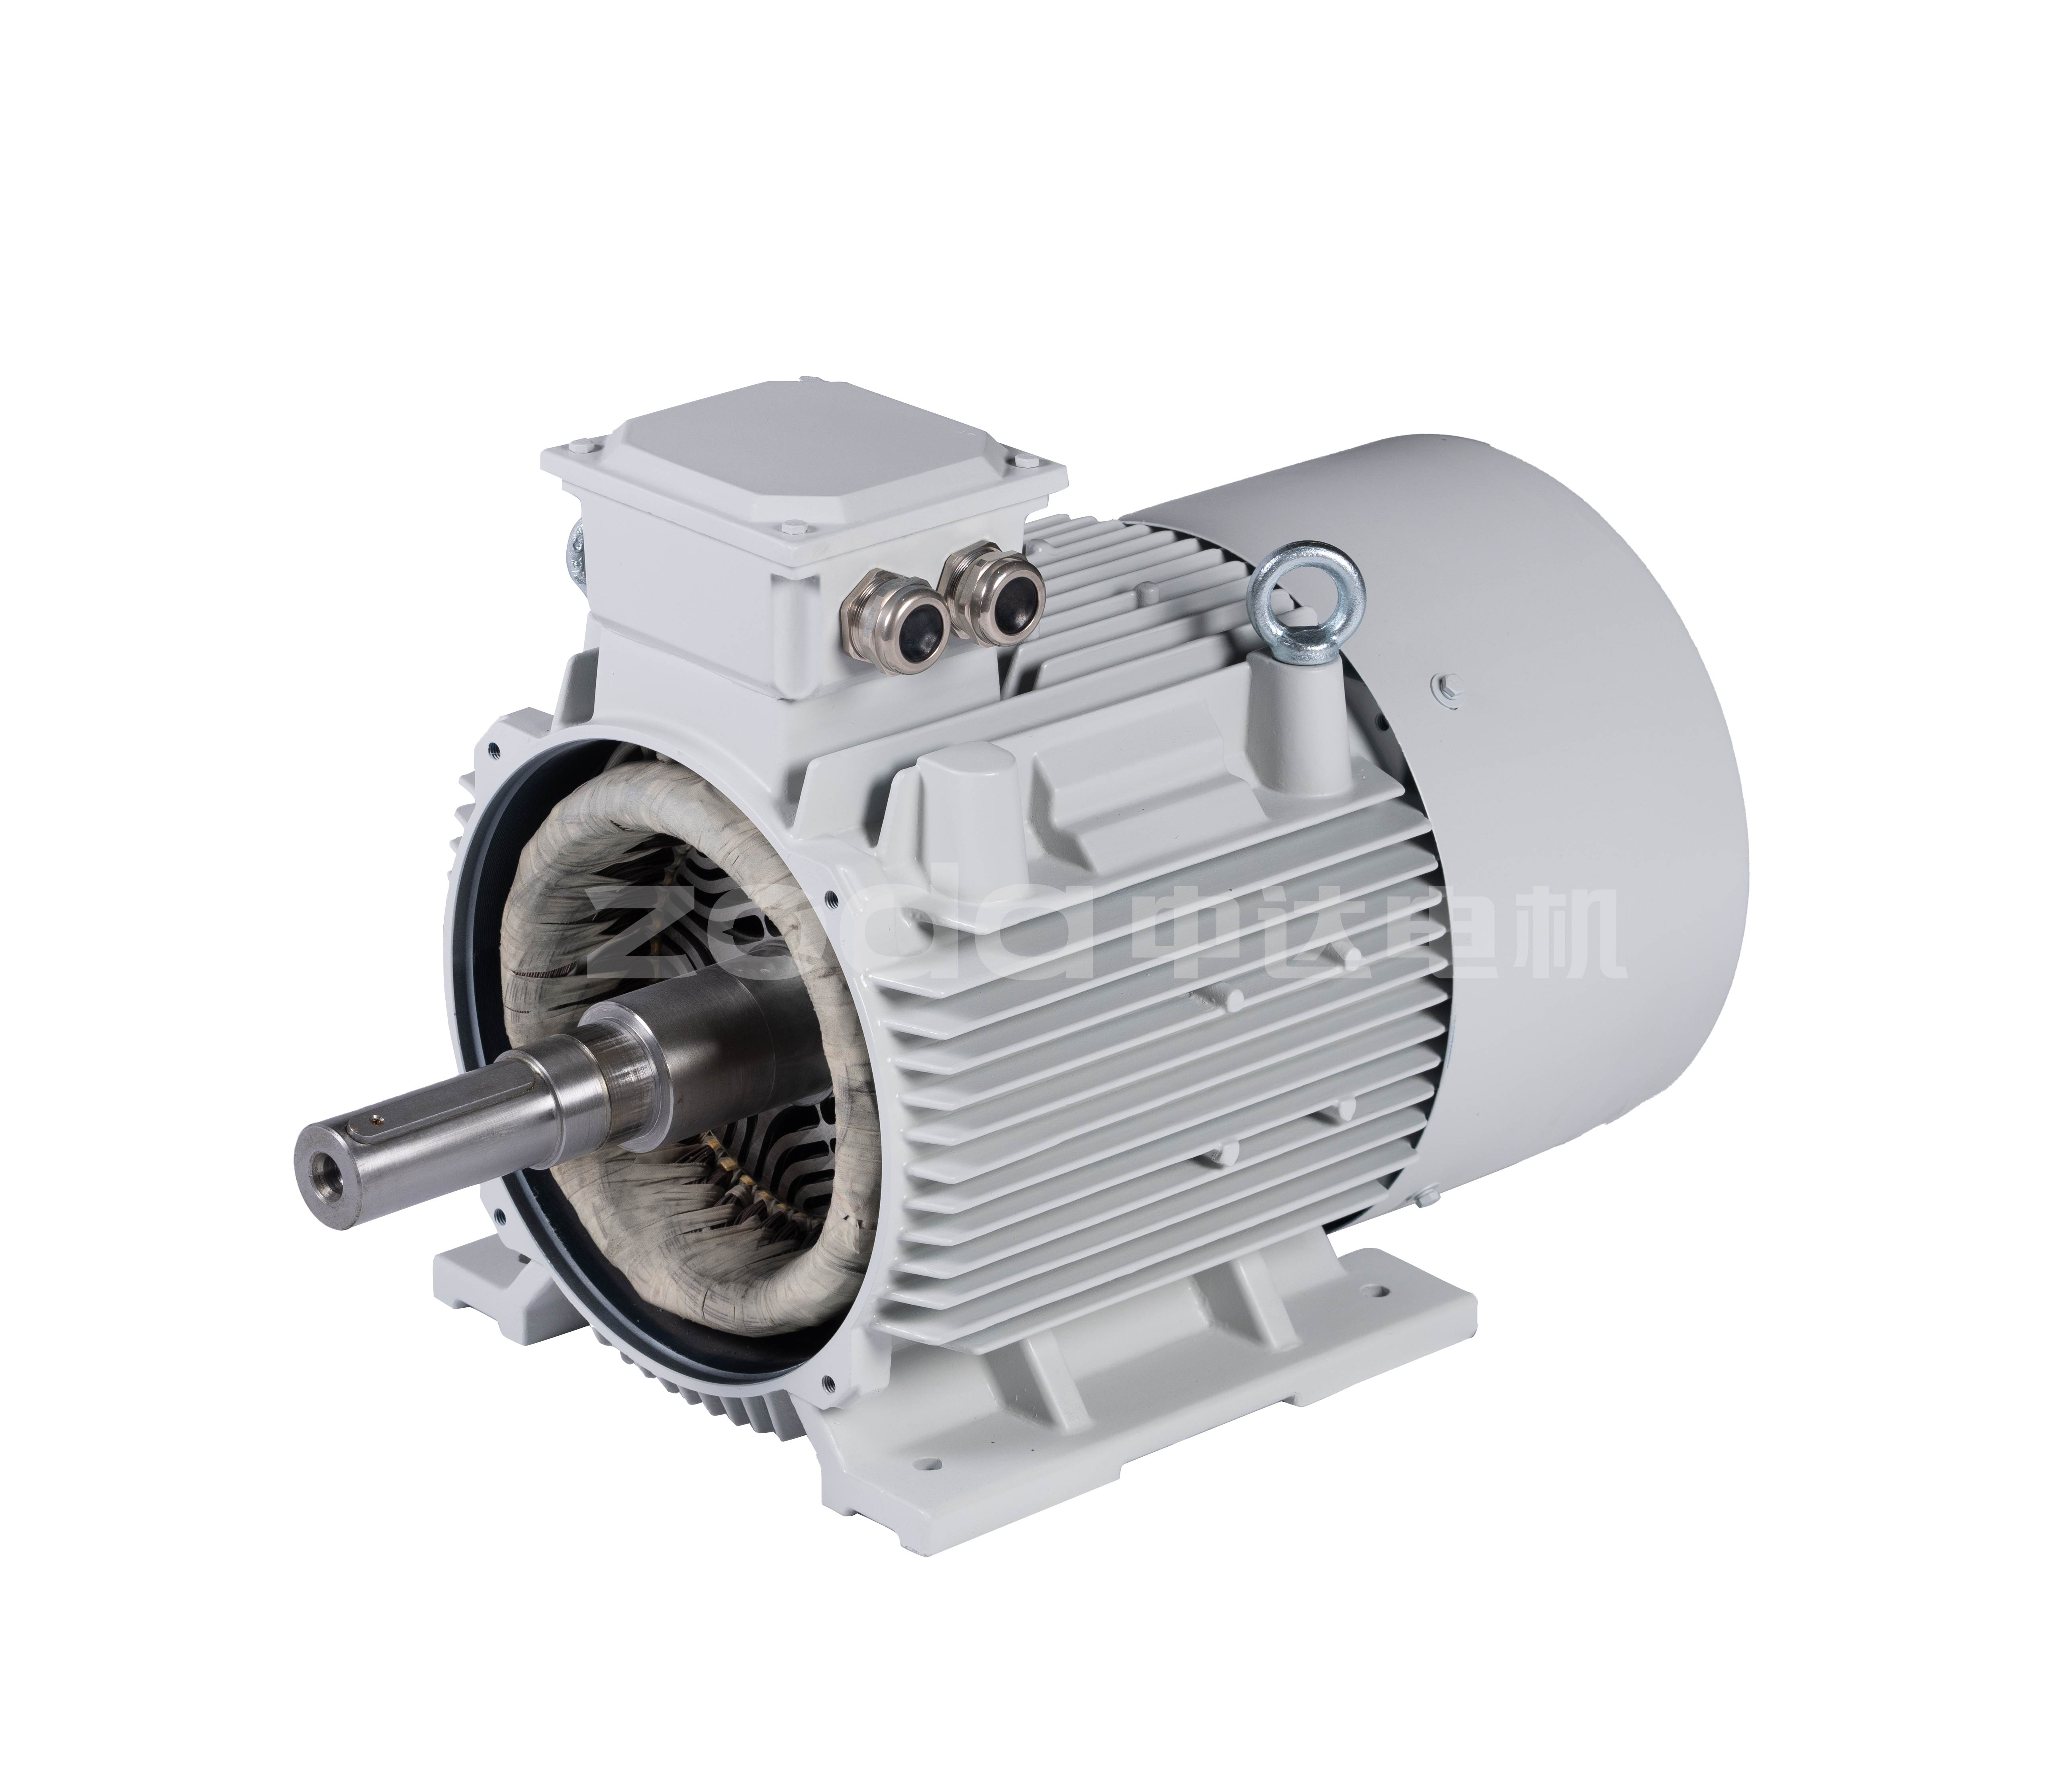 RM series synchronous reluctance motor